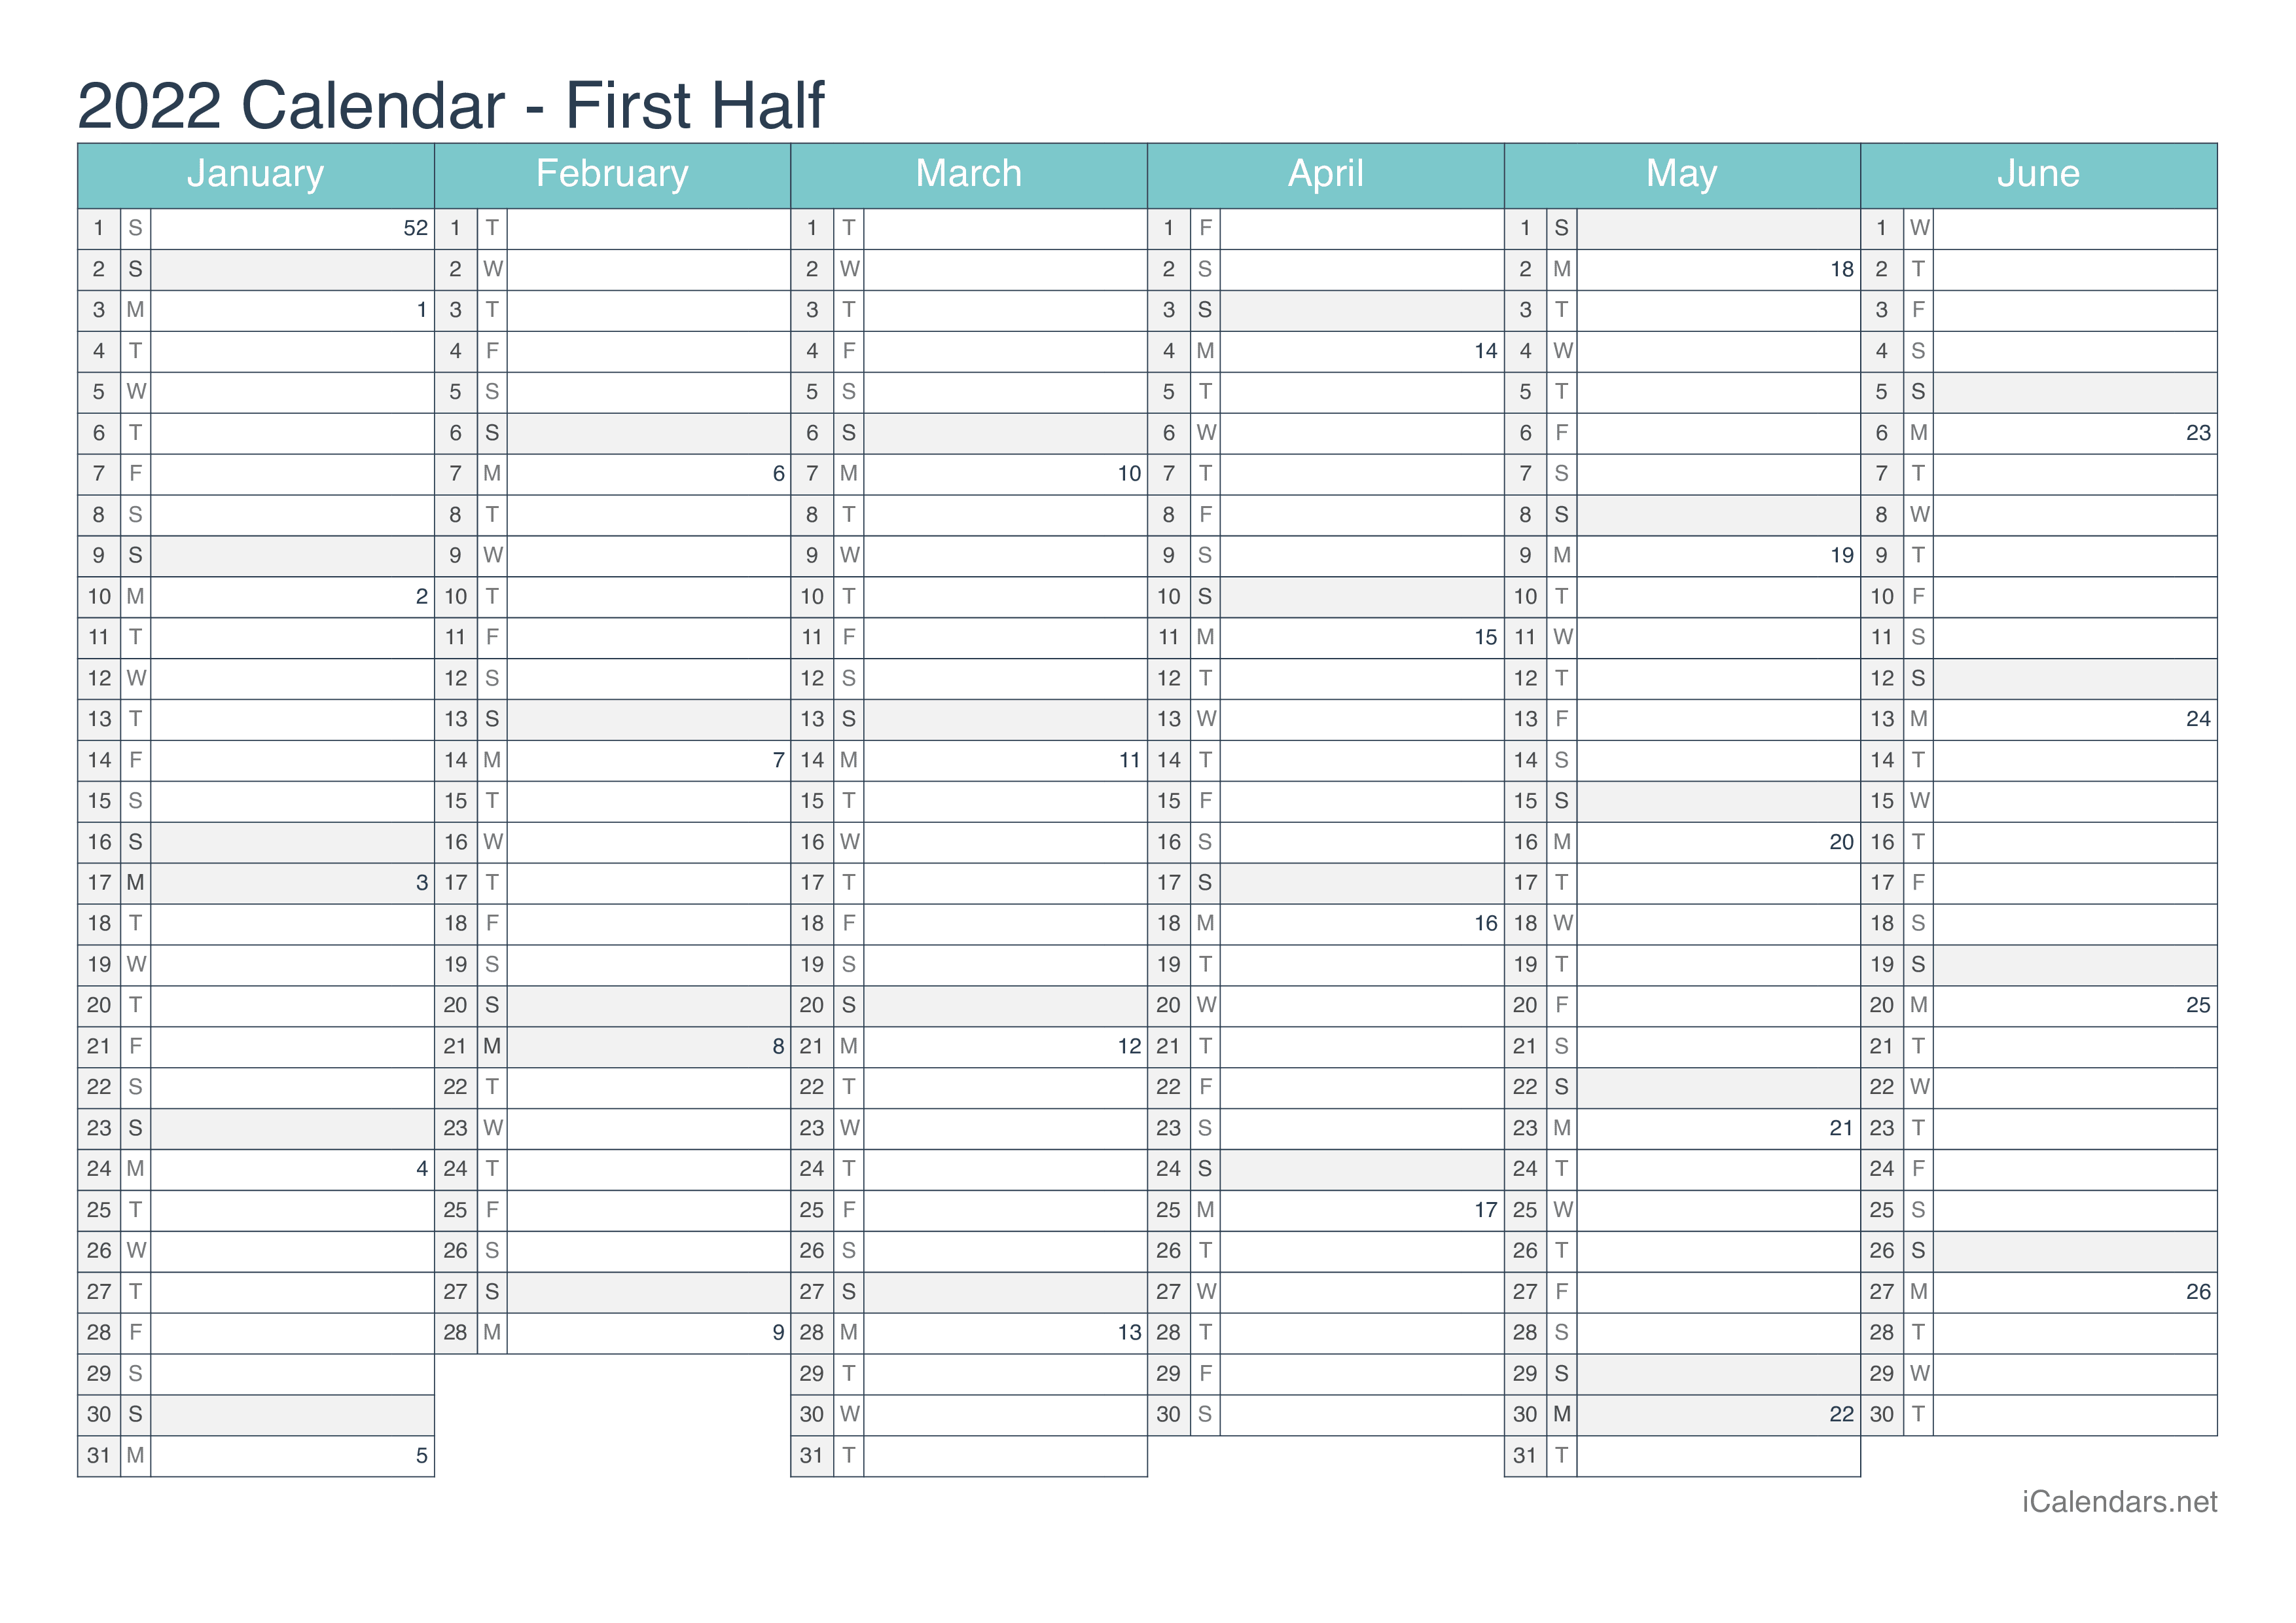 2022 Half year calendar with week numbers - Turquoise